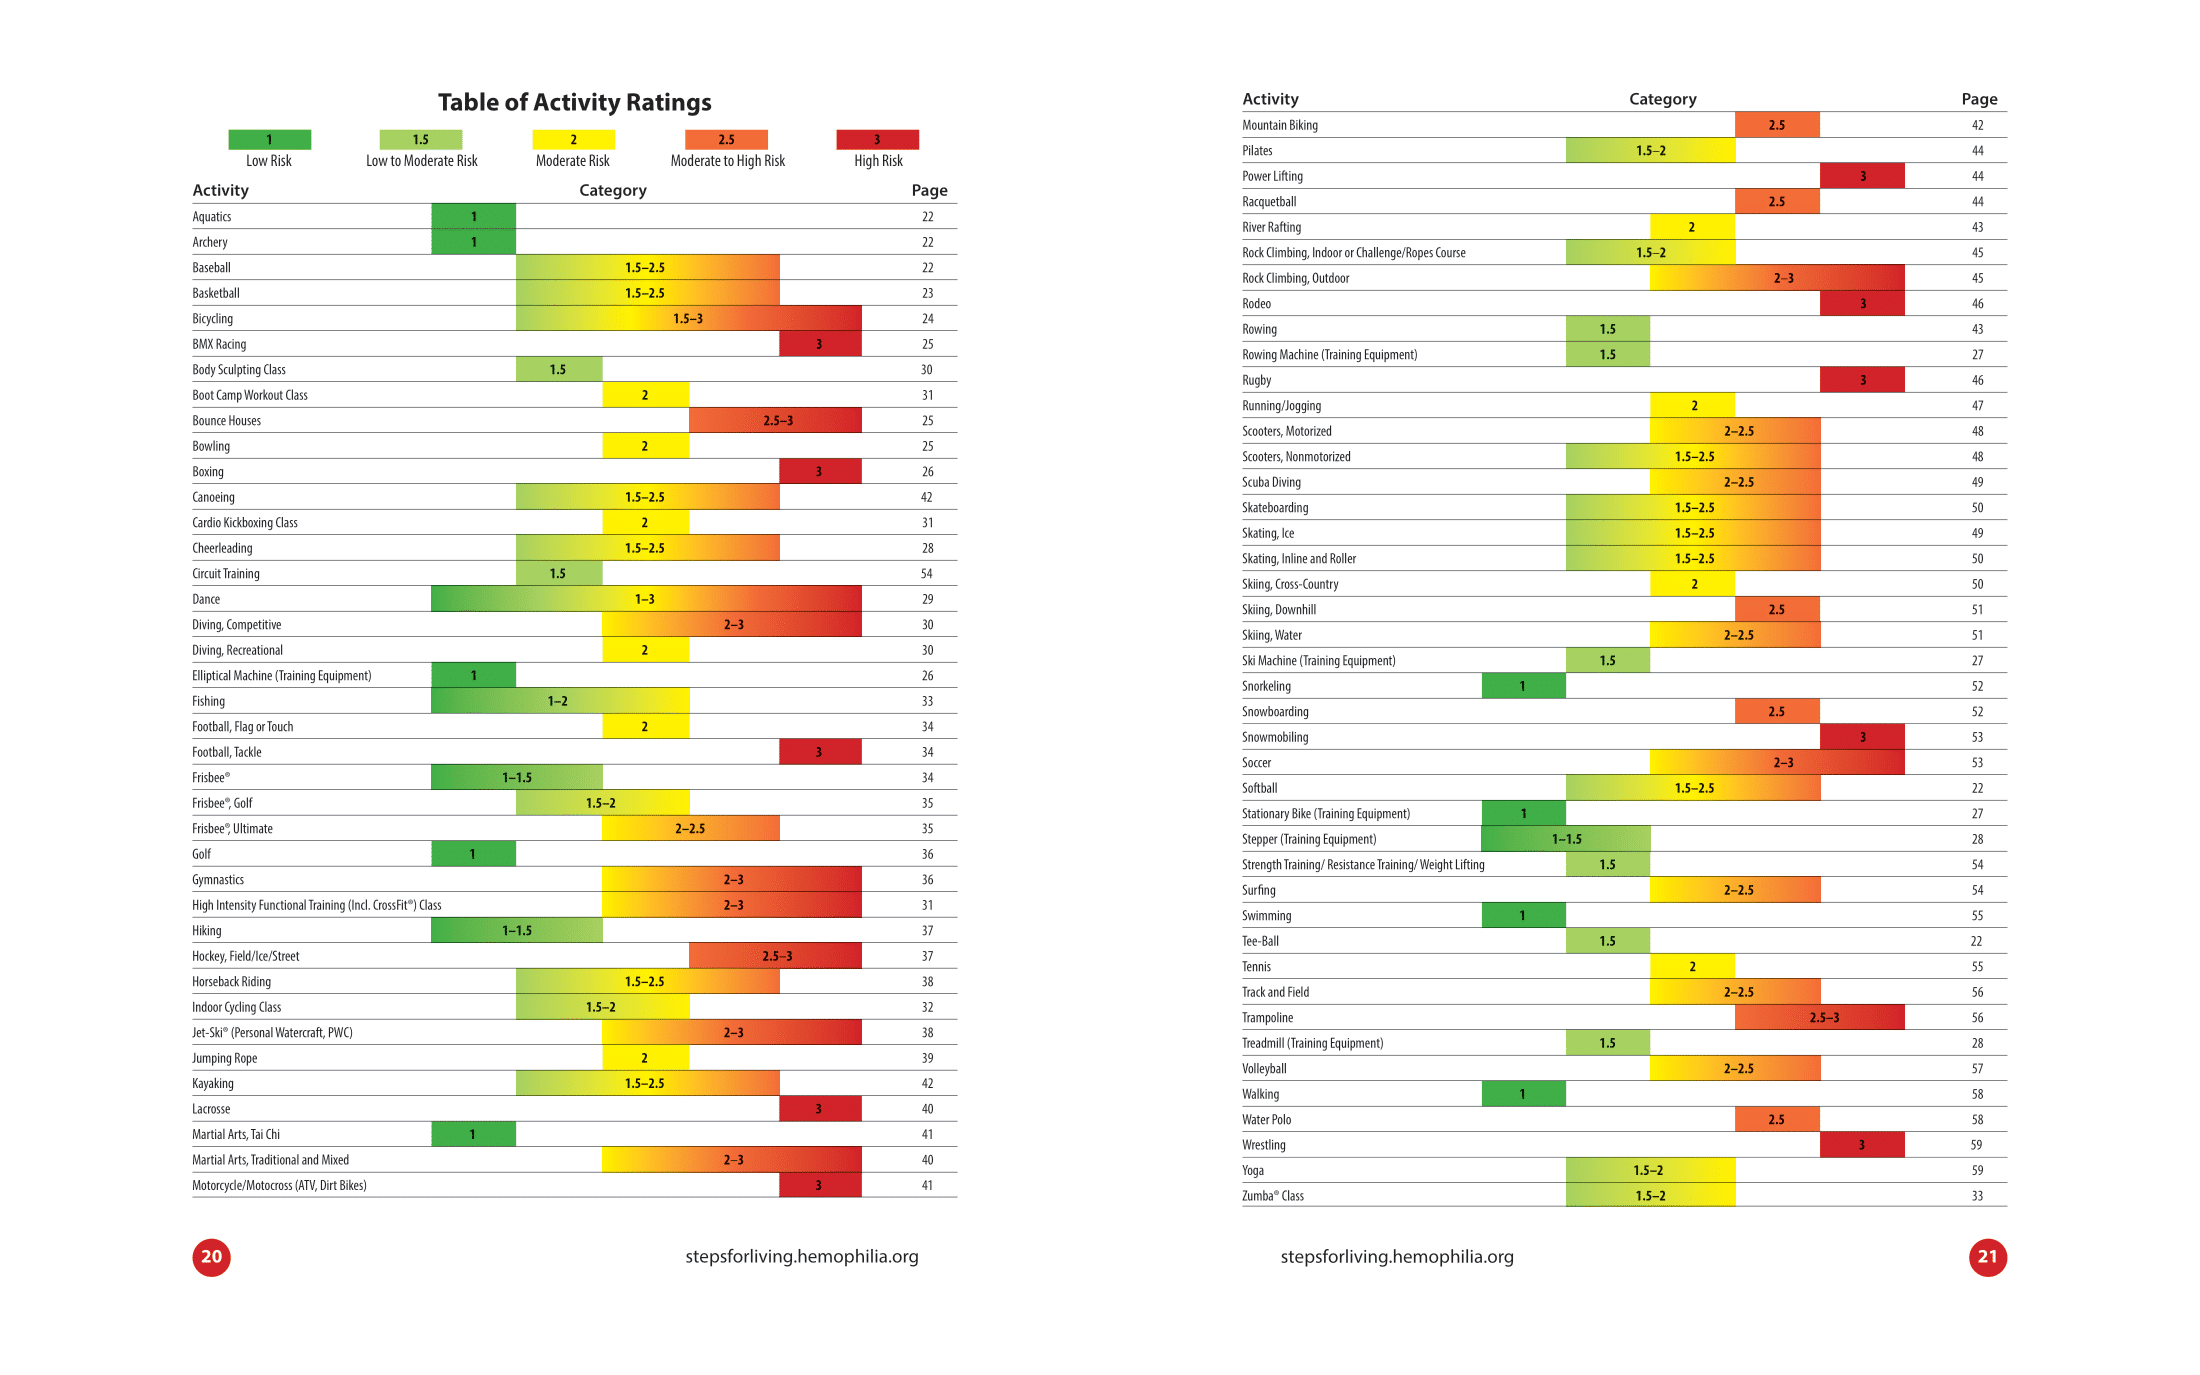 Table of Activity Ratings for Von Willebrand Disease